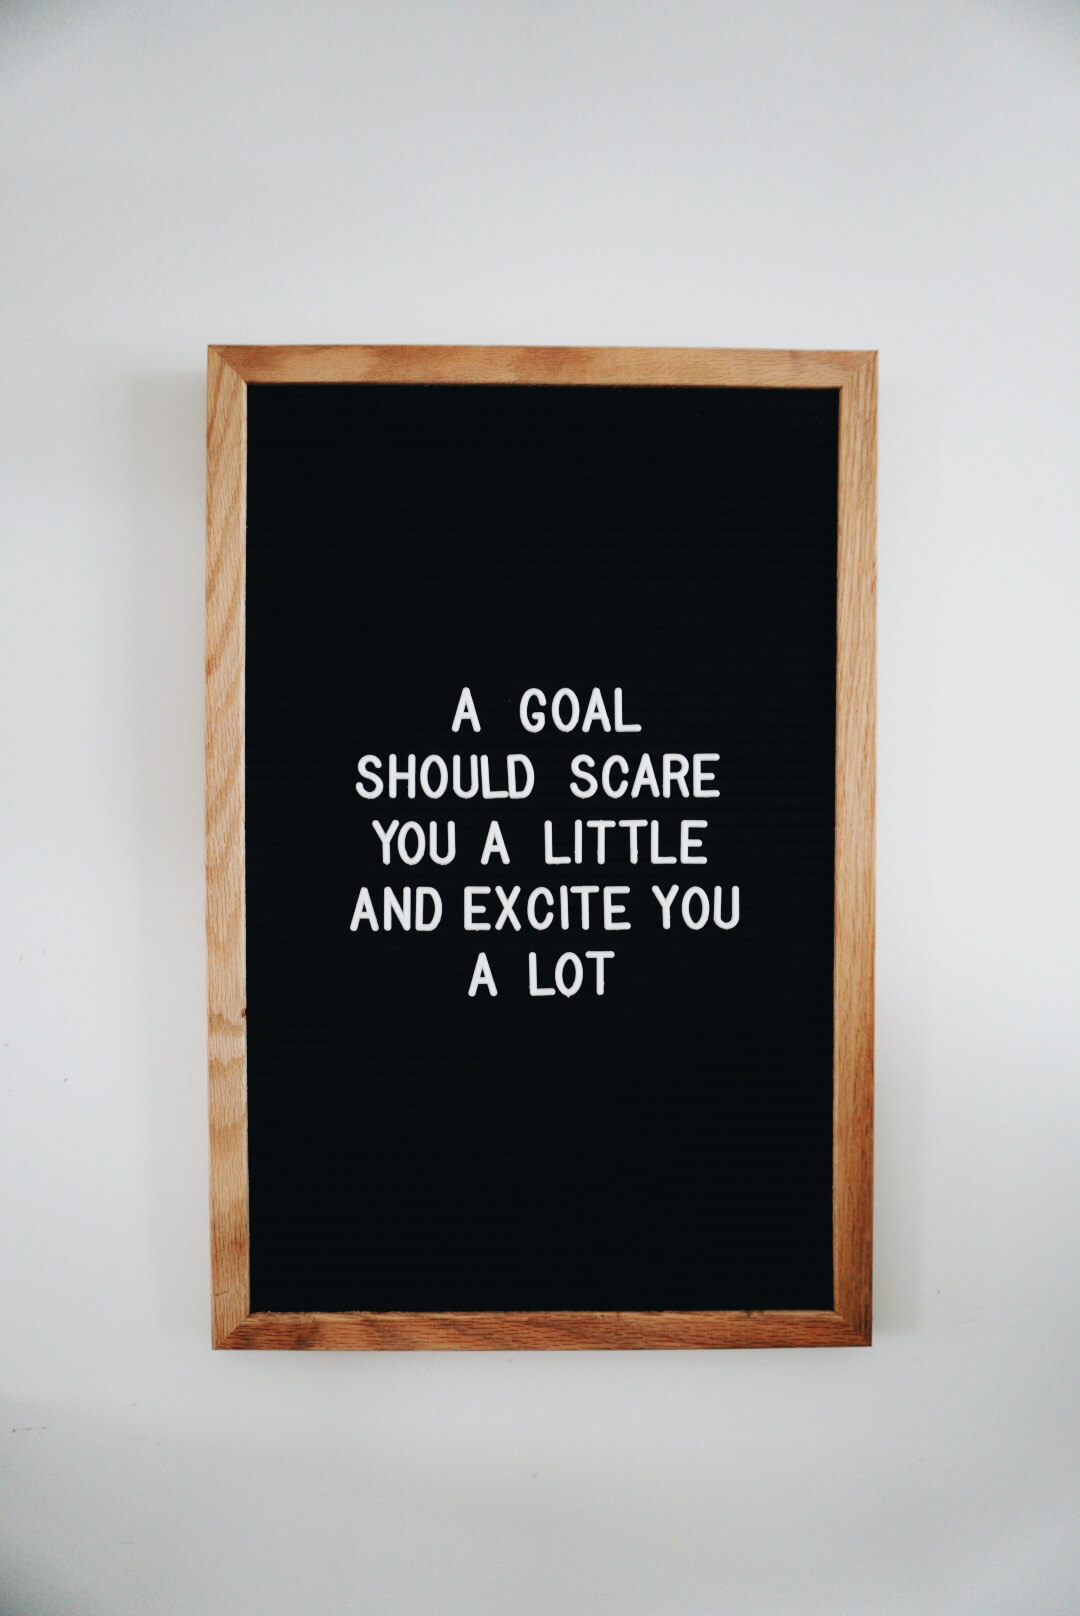 A goal should scare you a little and excite you a lot